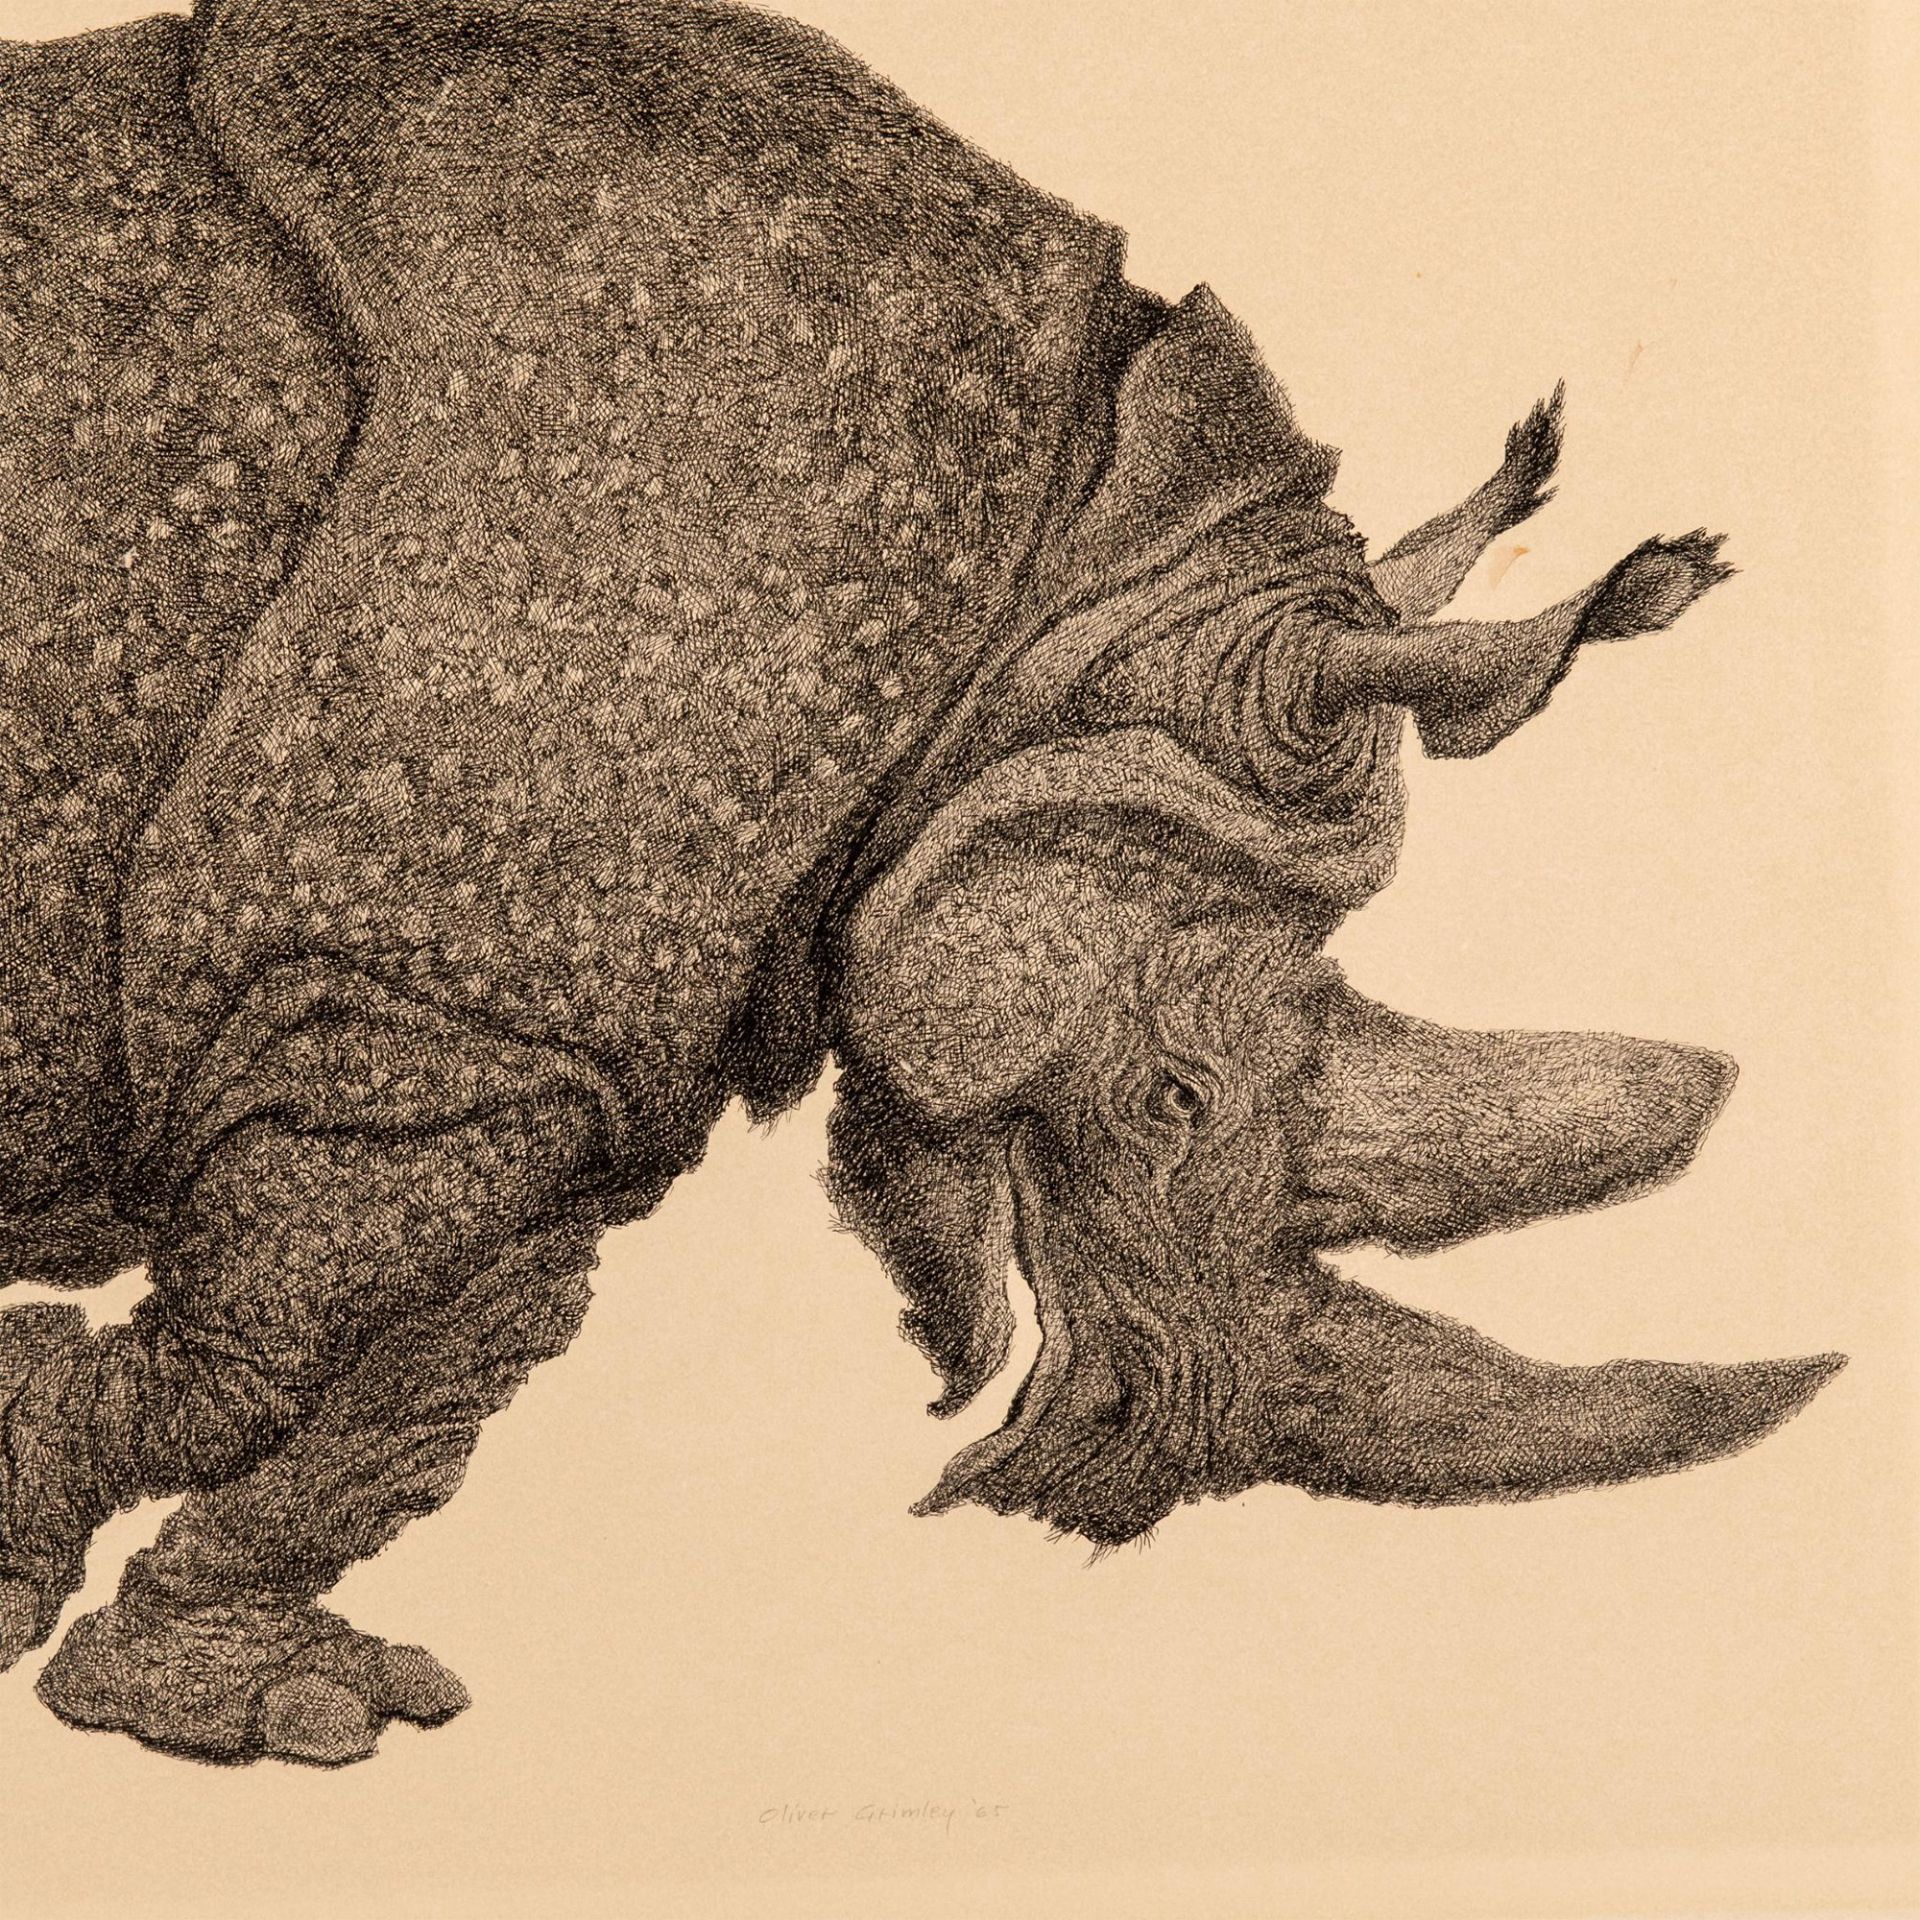 Oliver Grimley, Original Pen & Ink Drawing on Paper, Rhino - Image 3 of 5